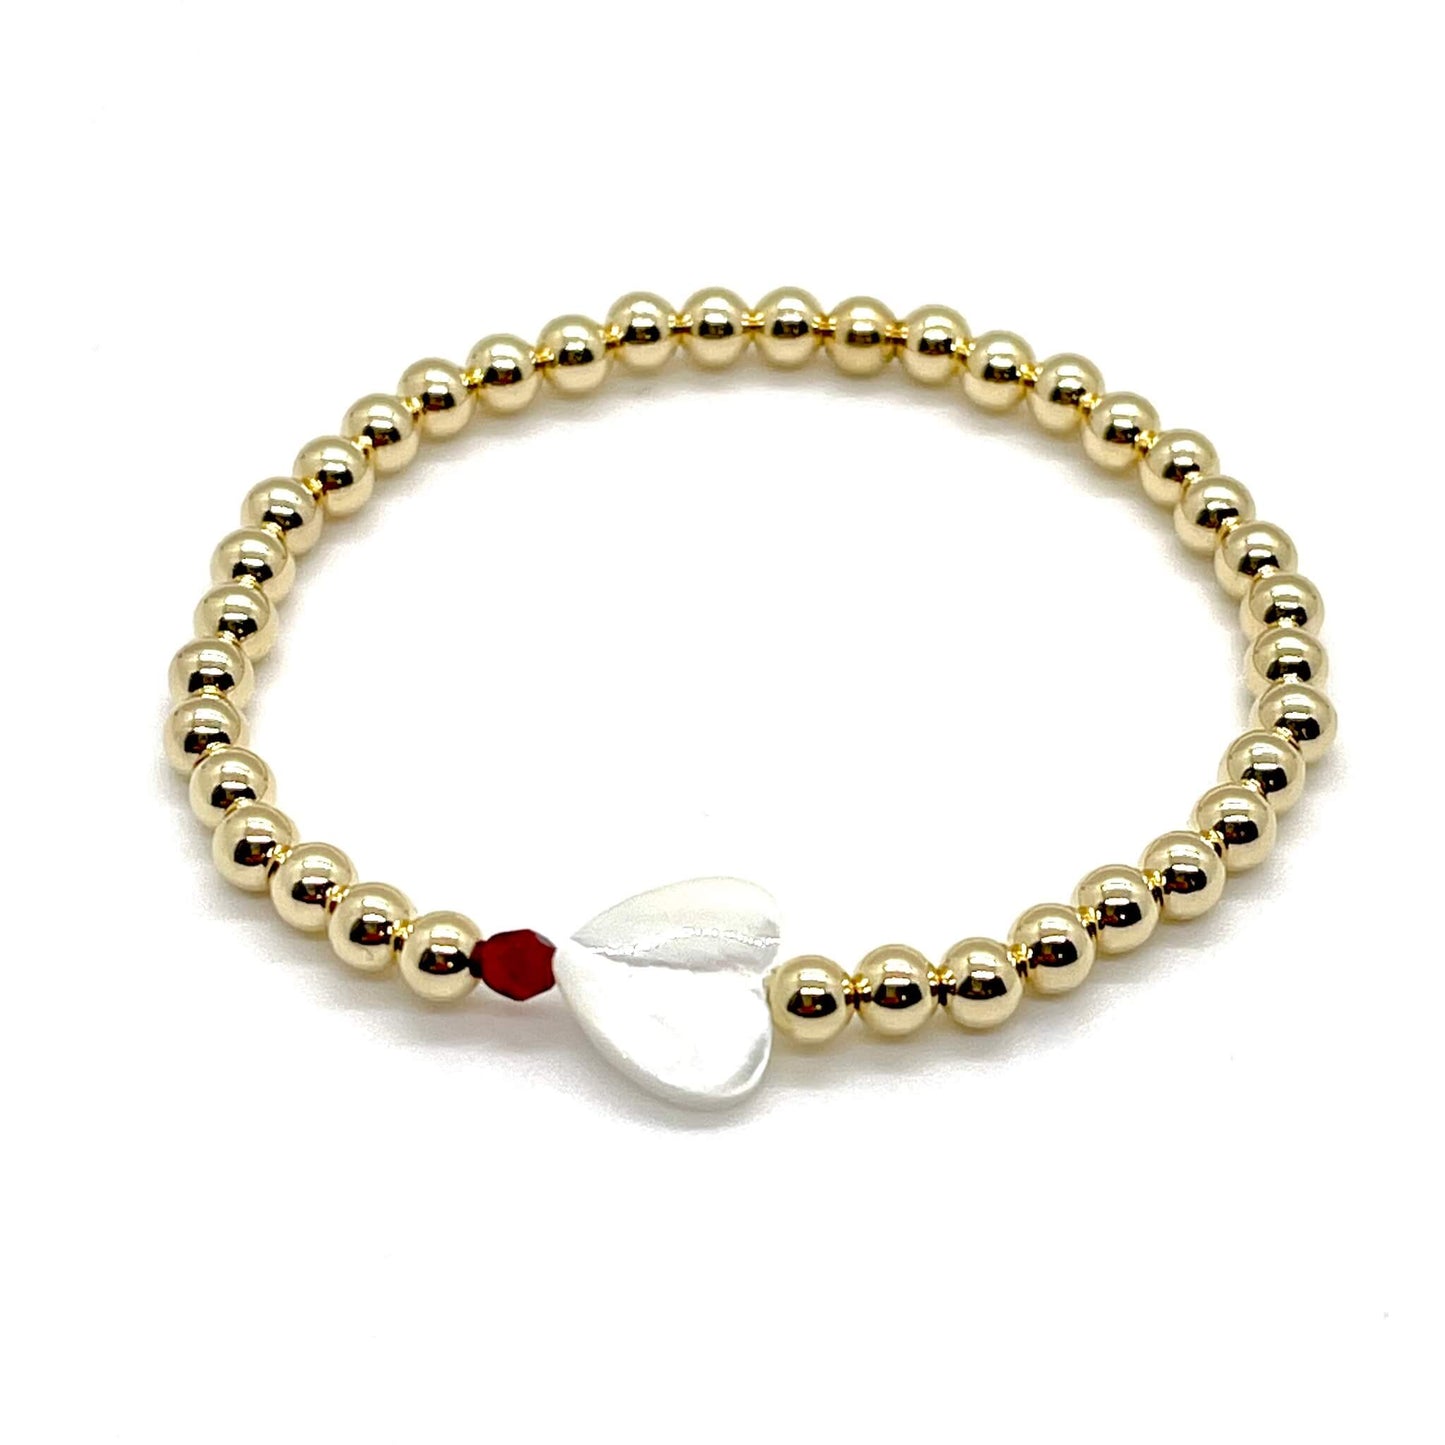 Gold heart bracelet with a mother-of-pearl heart, a small faceted red crystal, and 4mm 14K gold filled beads.